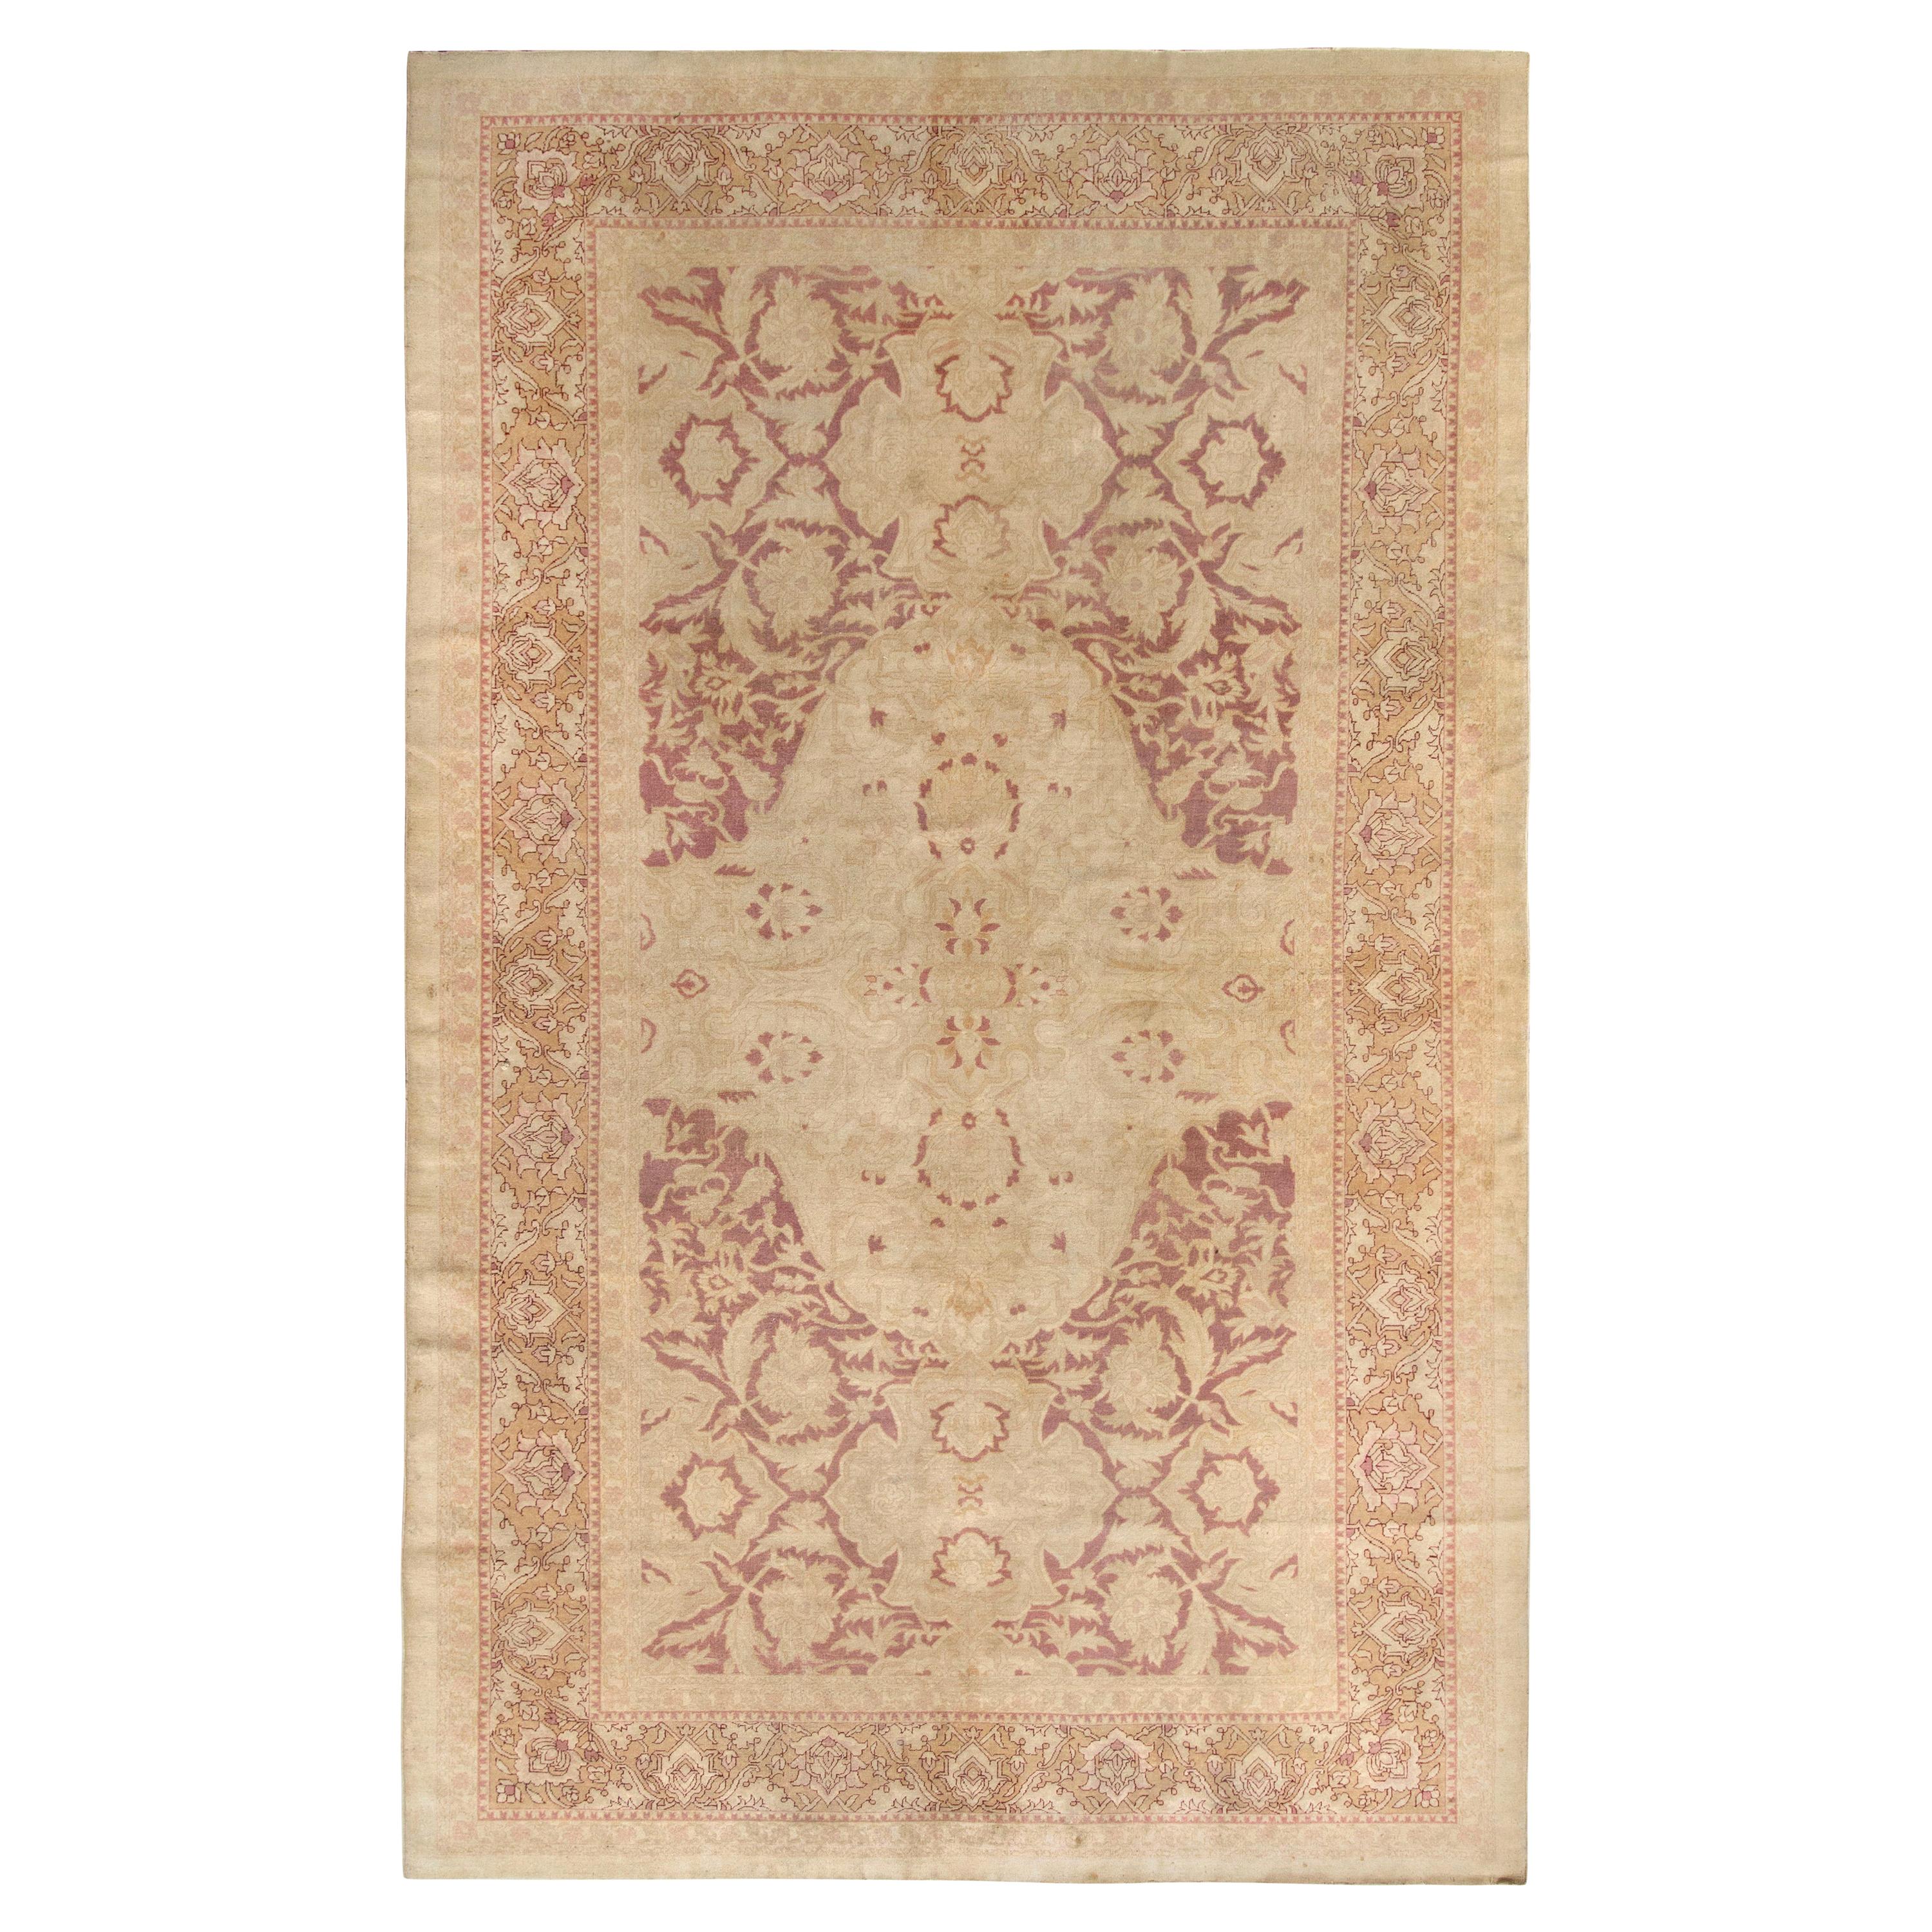 Hand-Knotted Antique Amritsar Rug in Beige-Brown Floral Pattern